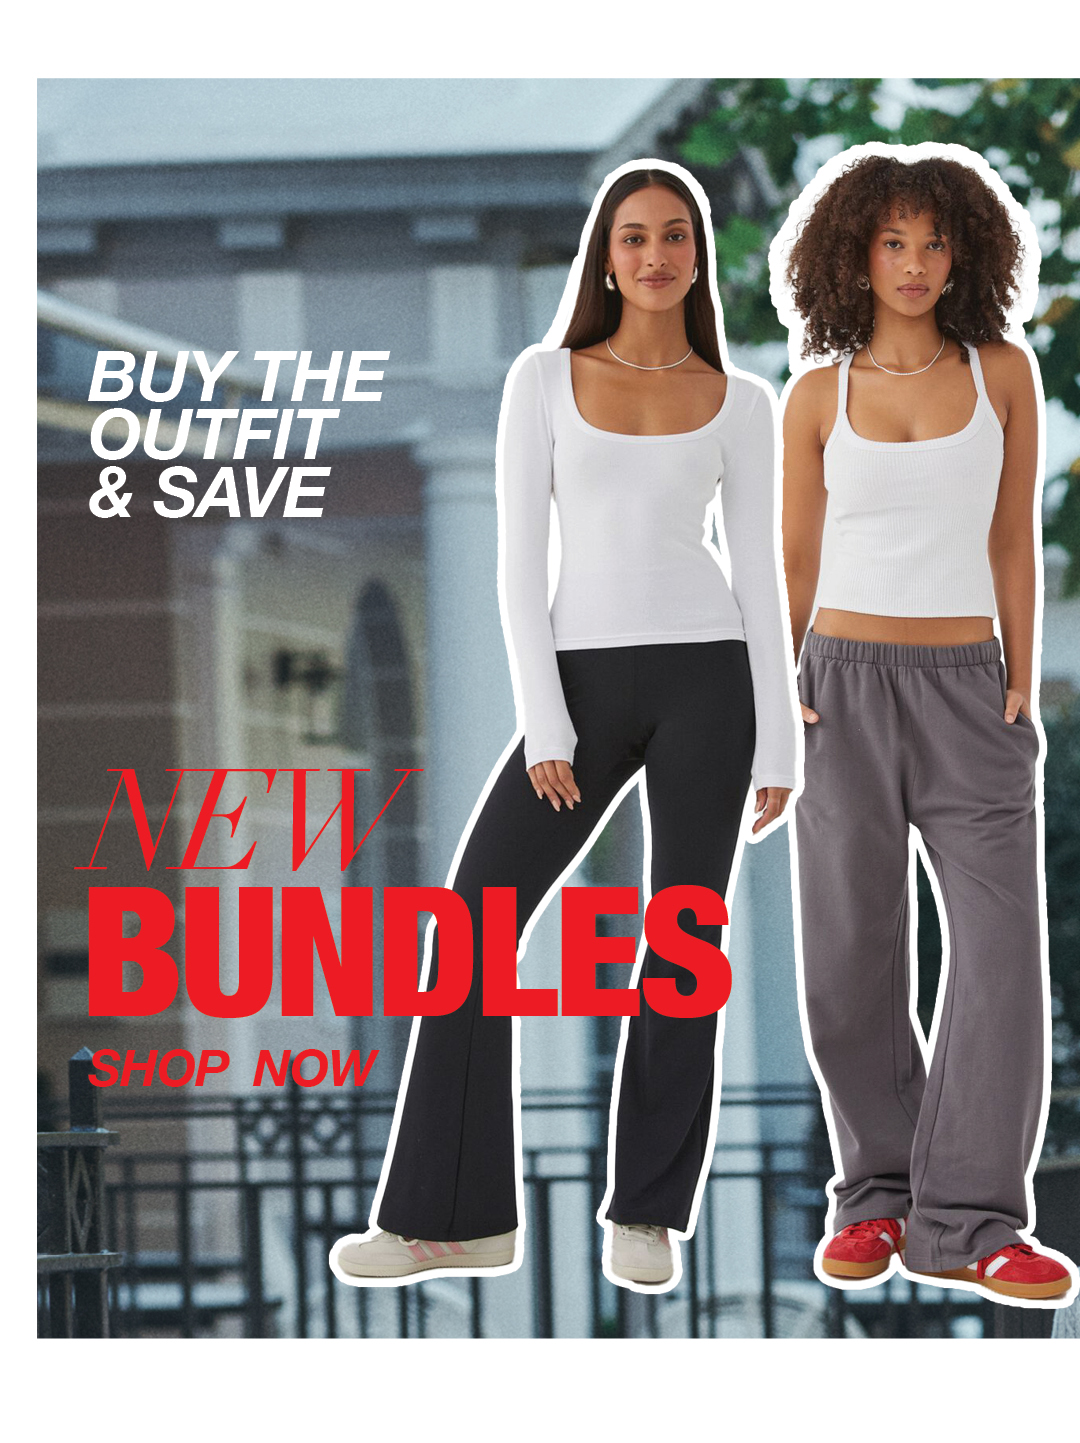 Shop Bundles At Supre. Get An Outfit For Less!